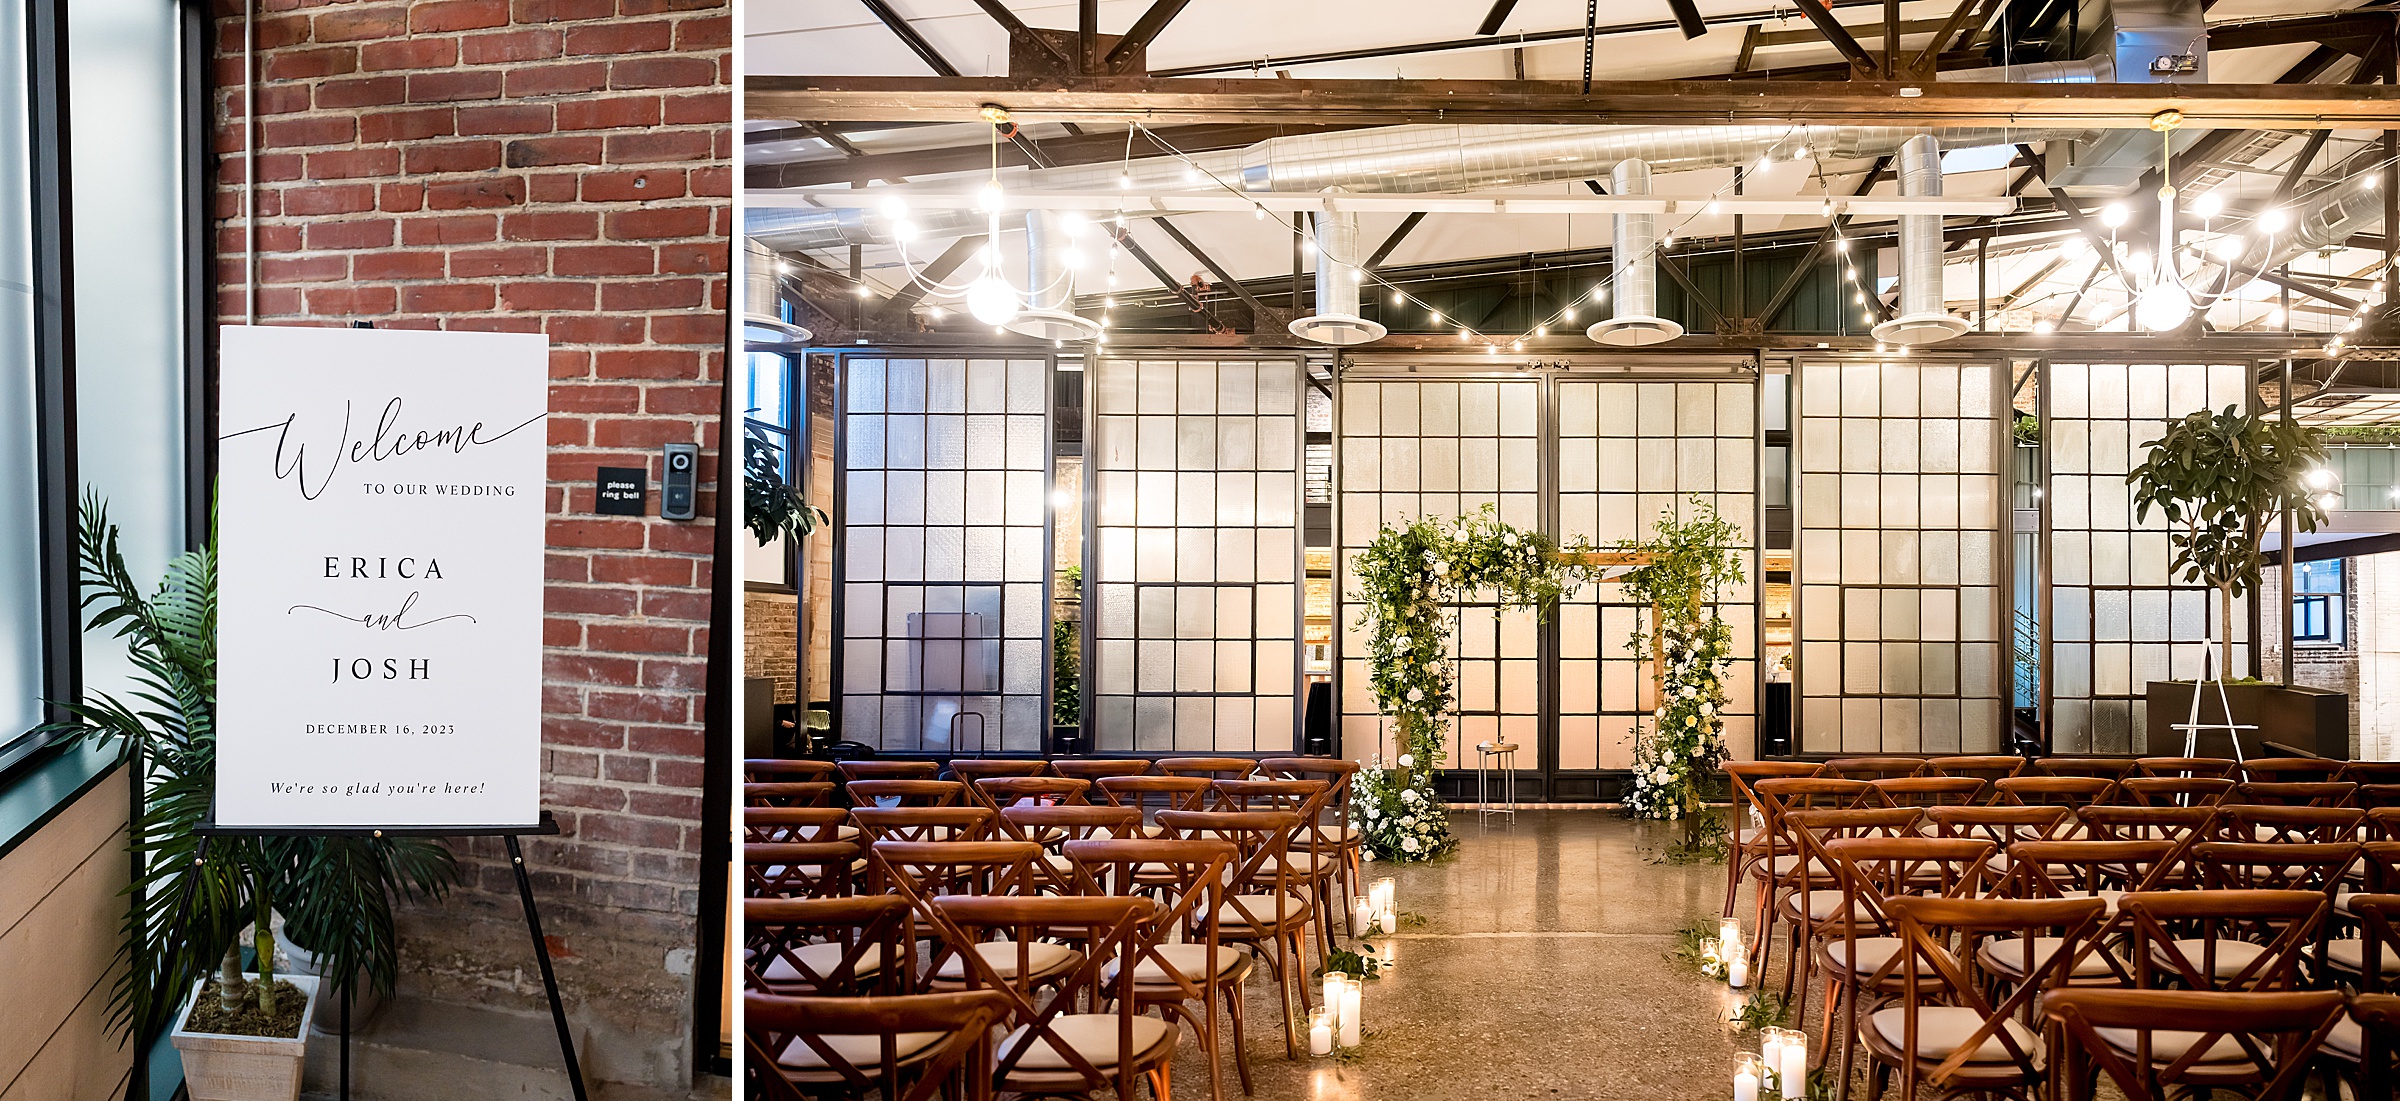 Lilah Events transformed a warehouse into a stunning wedding venue, complete with chairs and a charming sign.